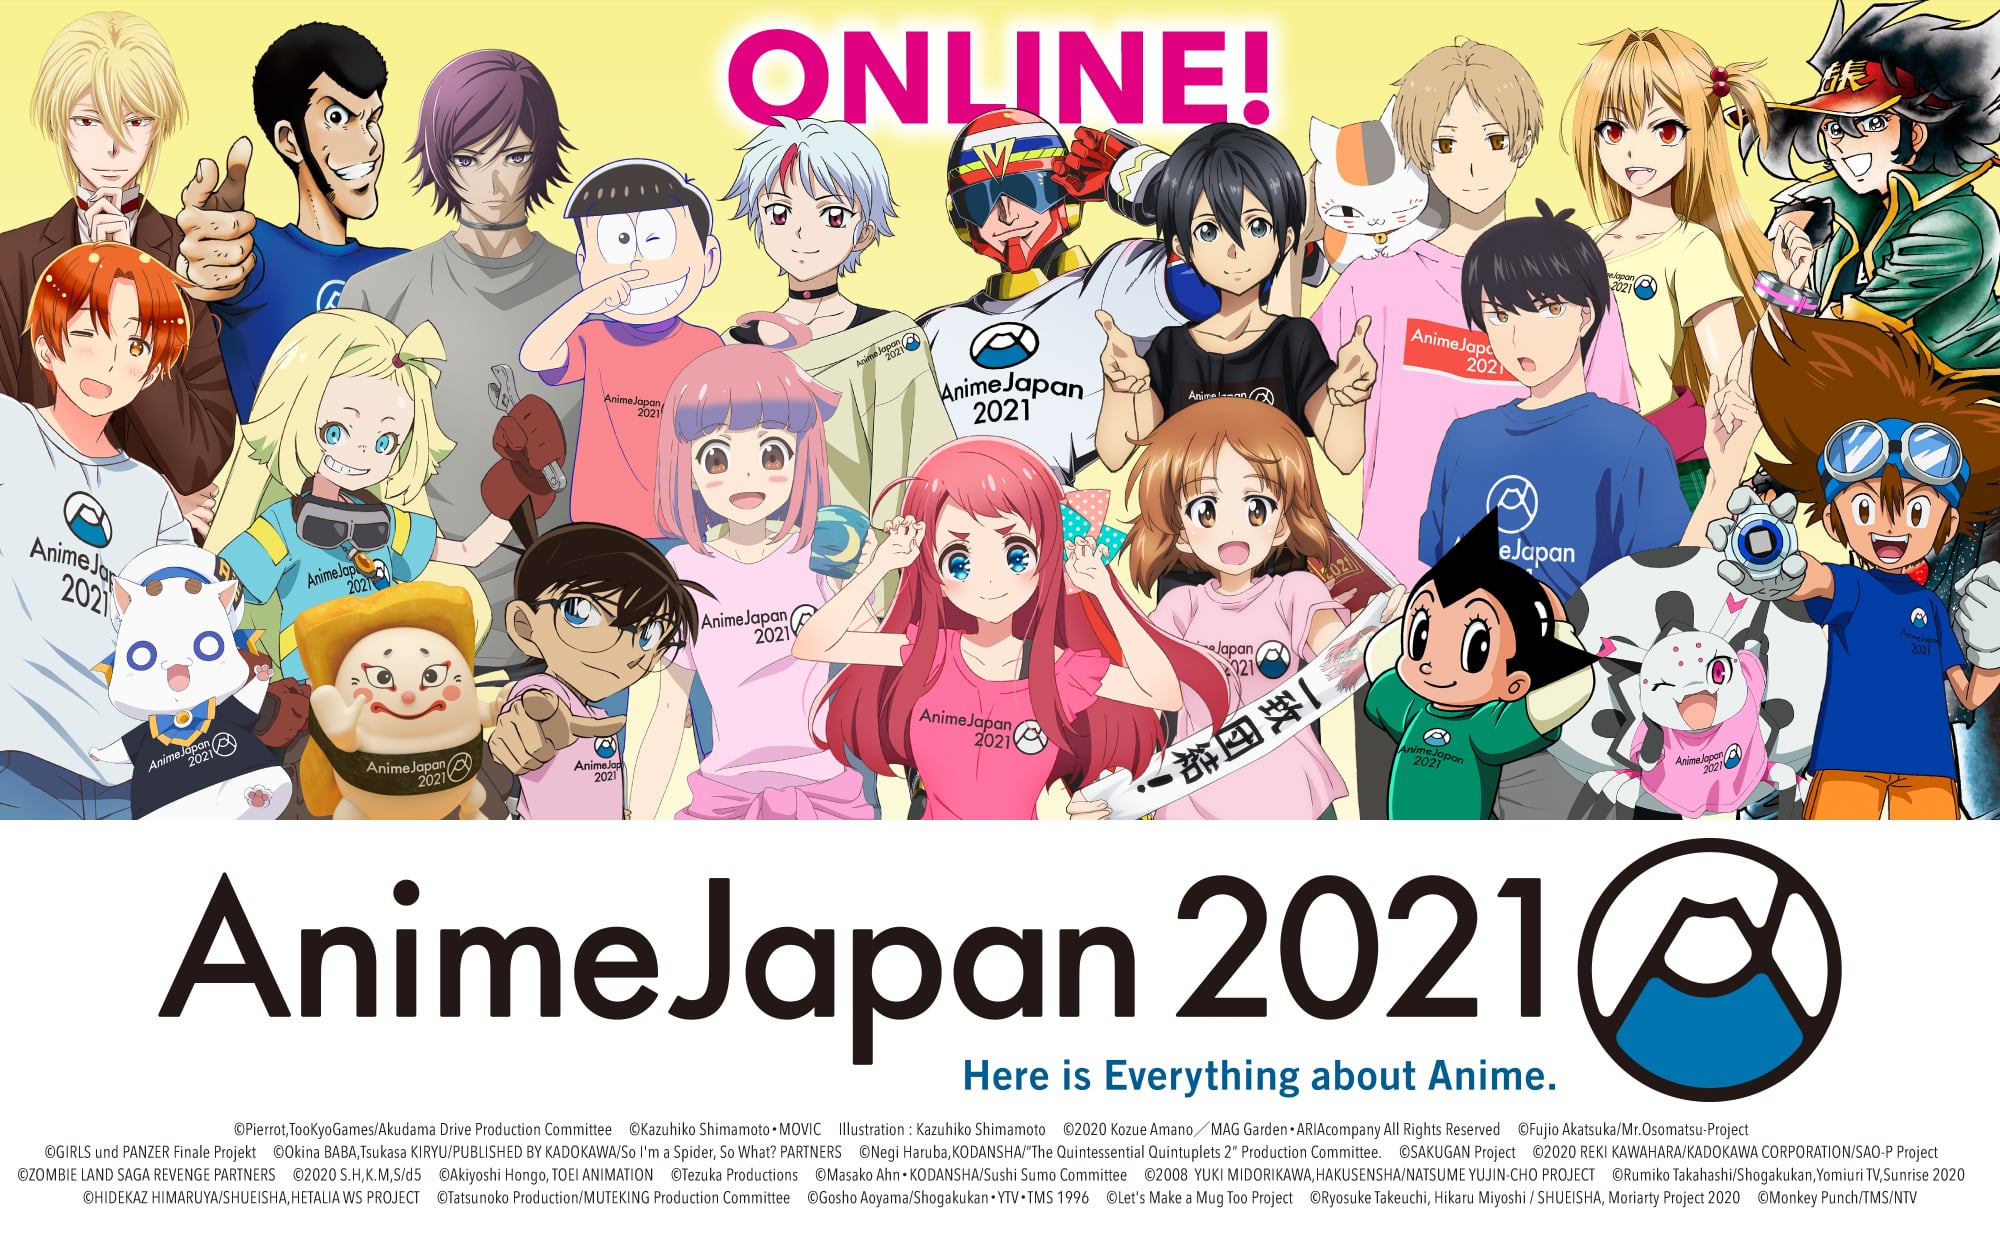 AnimeJapan 2021 will be Held Online with over 50 Streaming Programs